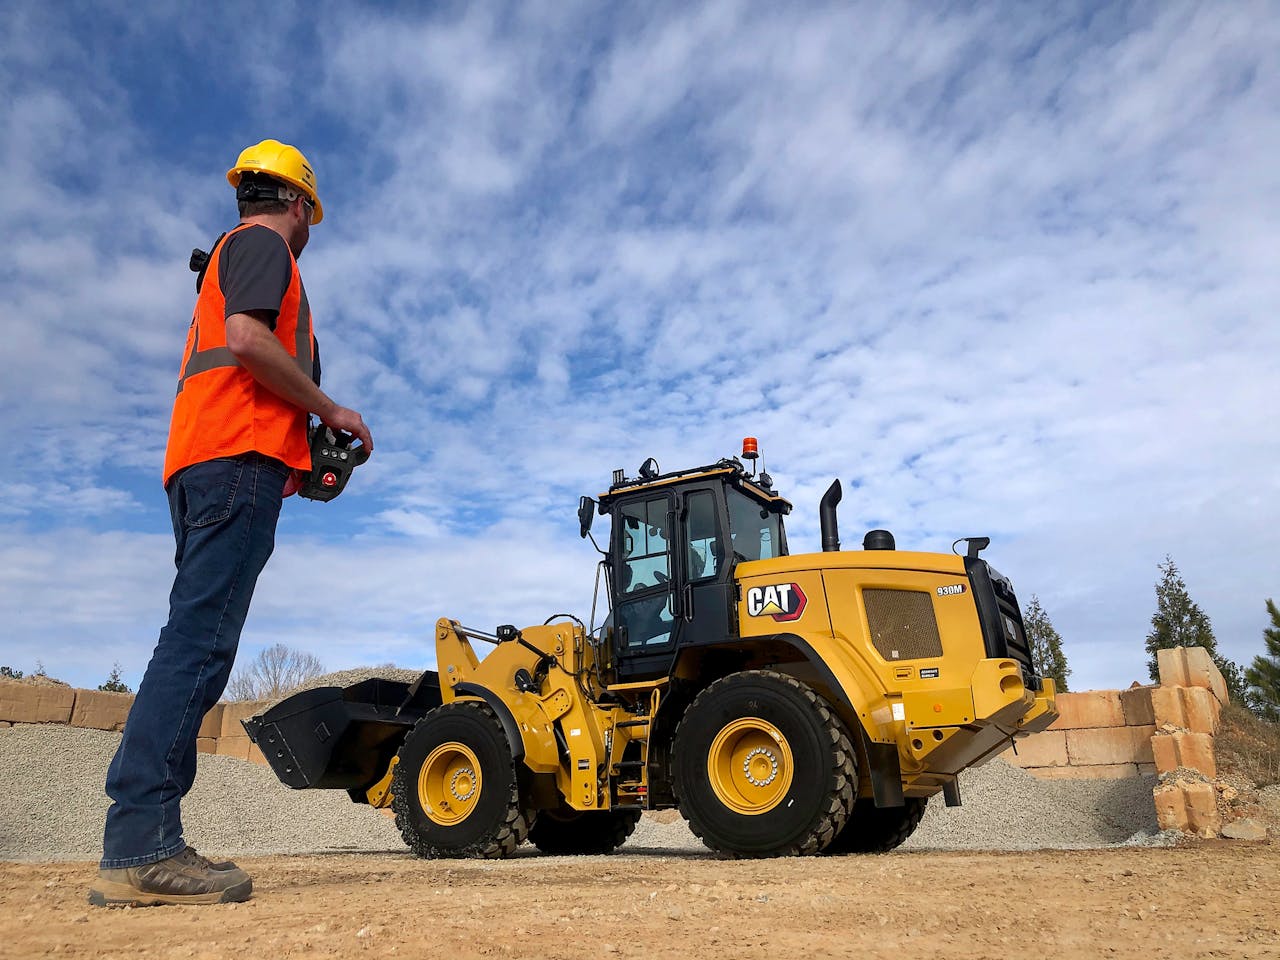 Caterpillar offers a full range of remote-controlled and autonomous solutions under the its Cat Command suite of products.